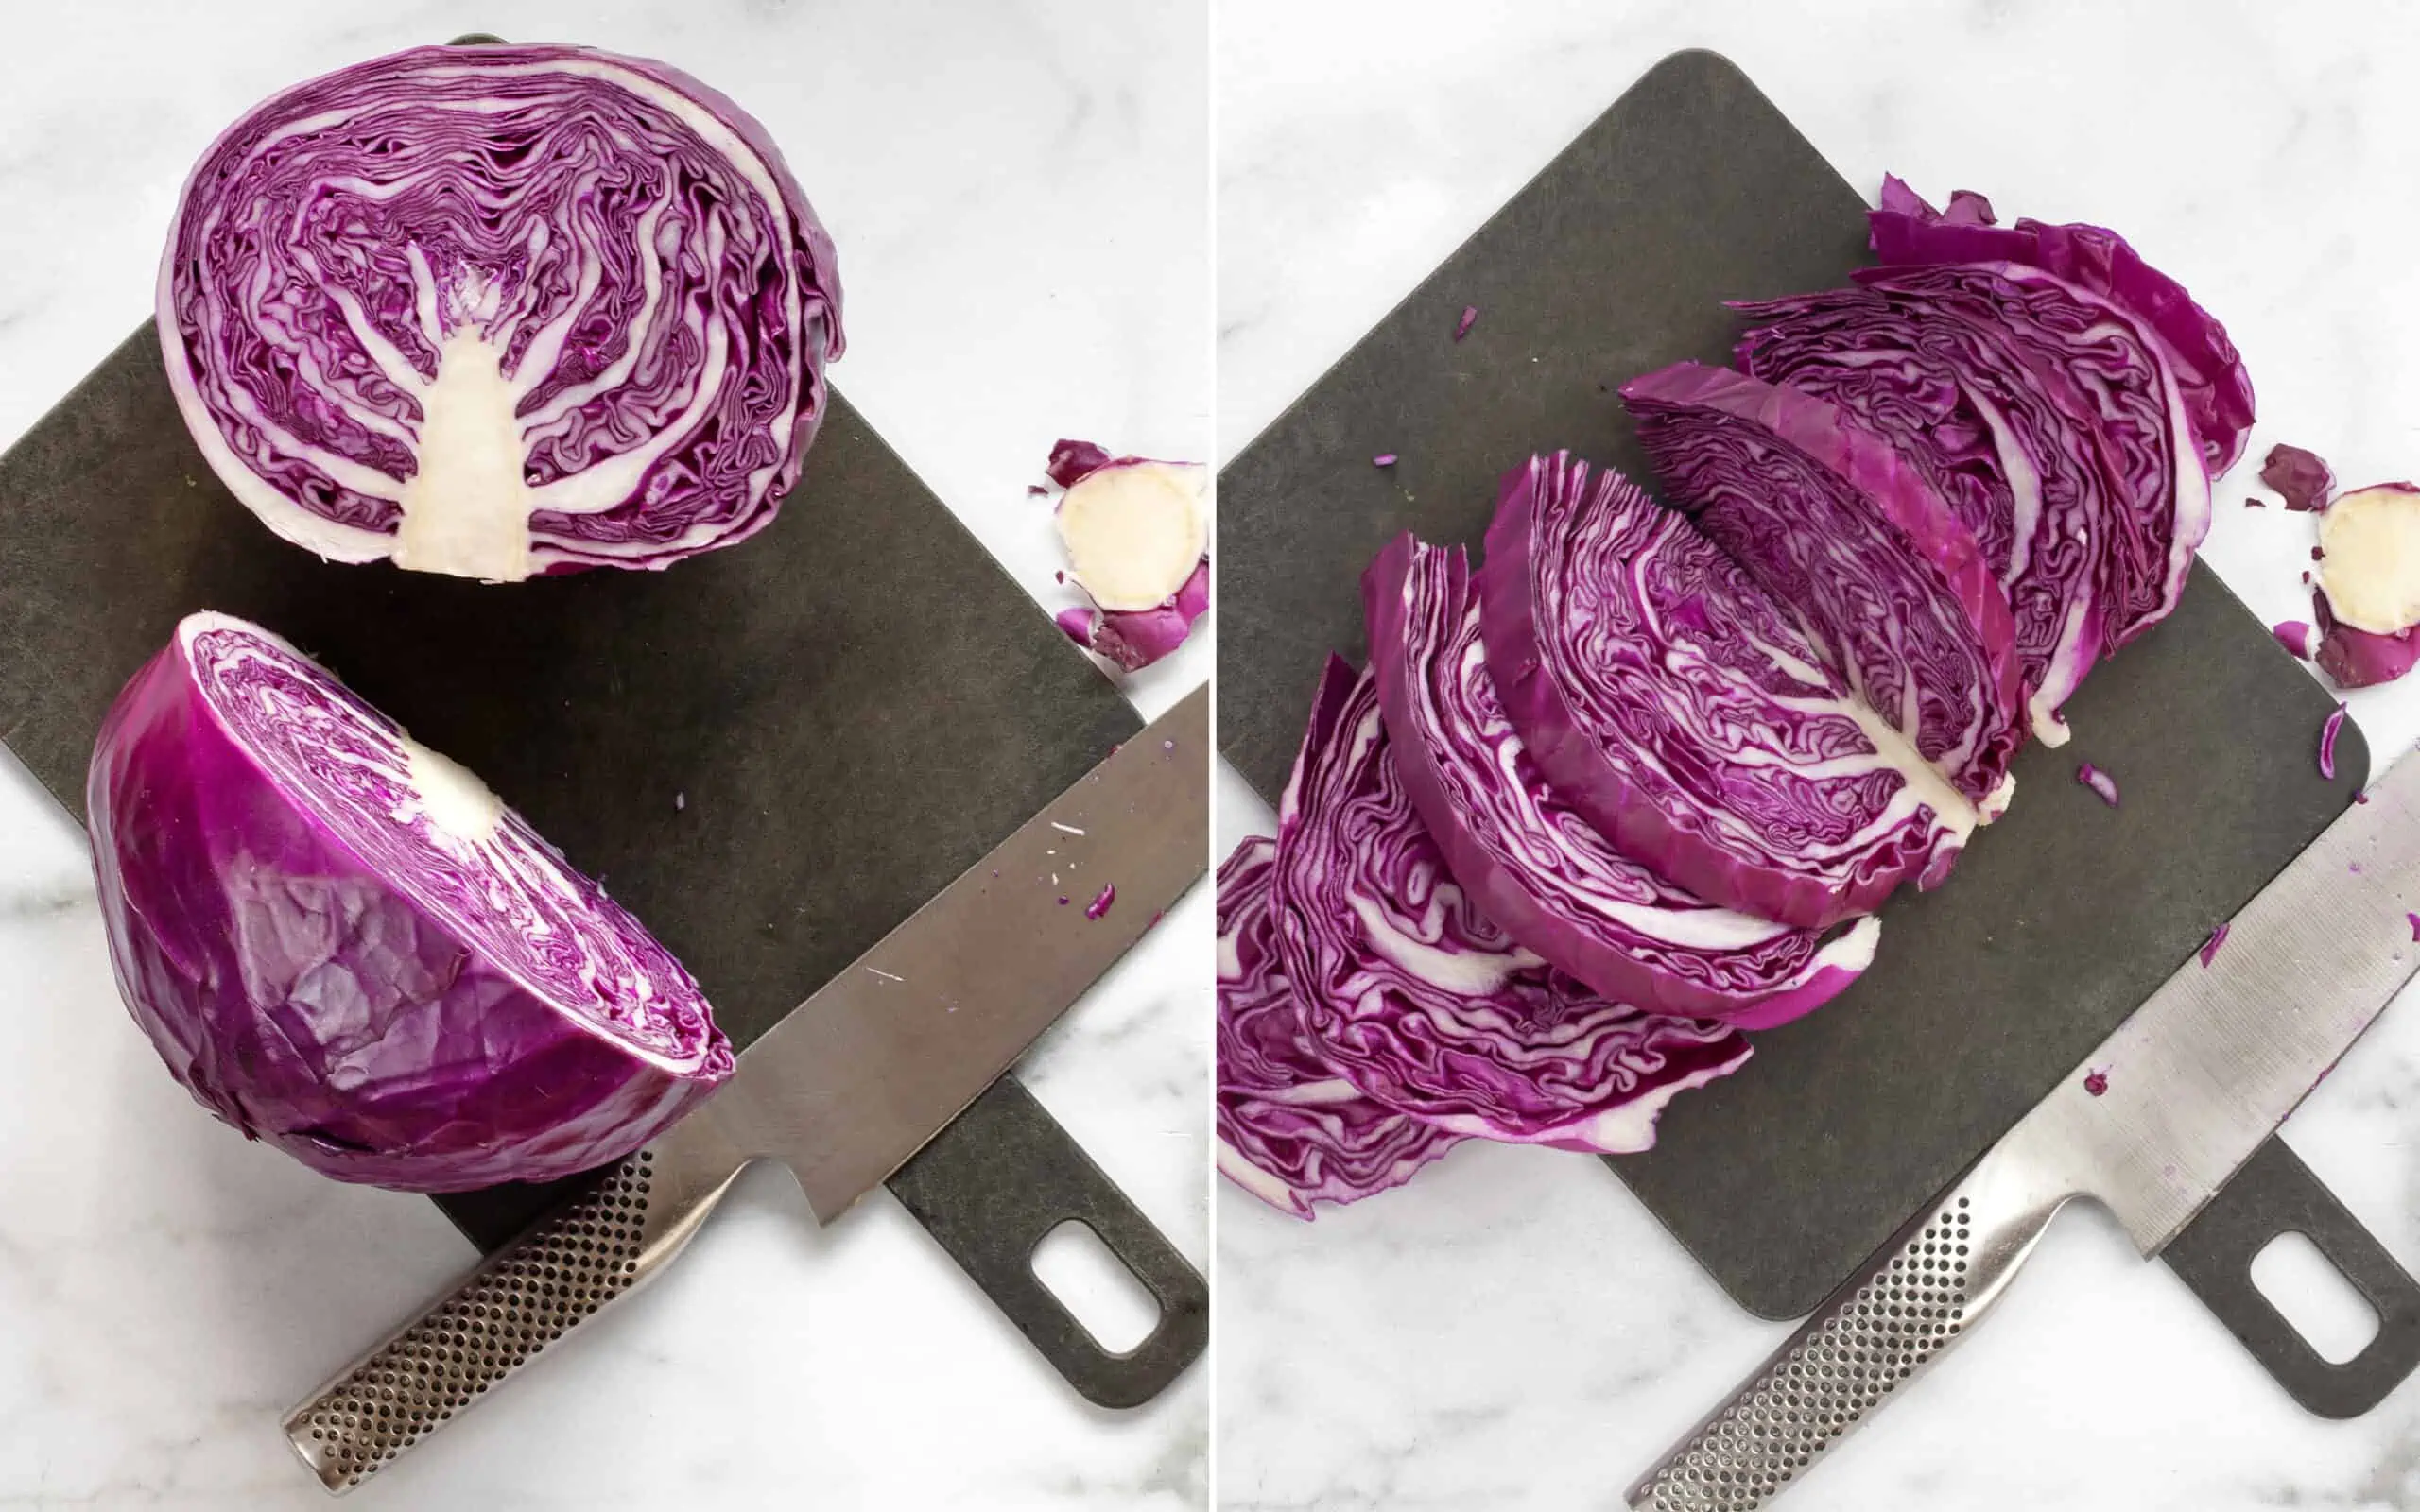 Halved cabbage head on a cutting board and sliced cabbage on another cutting board.